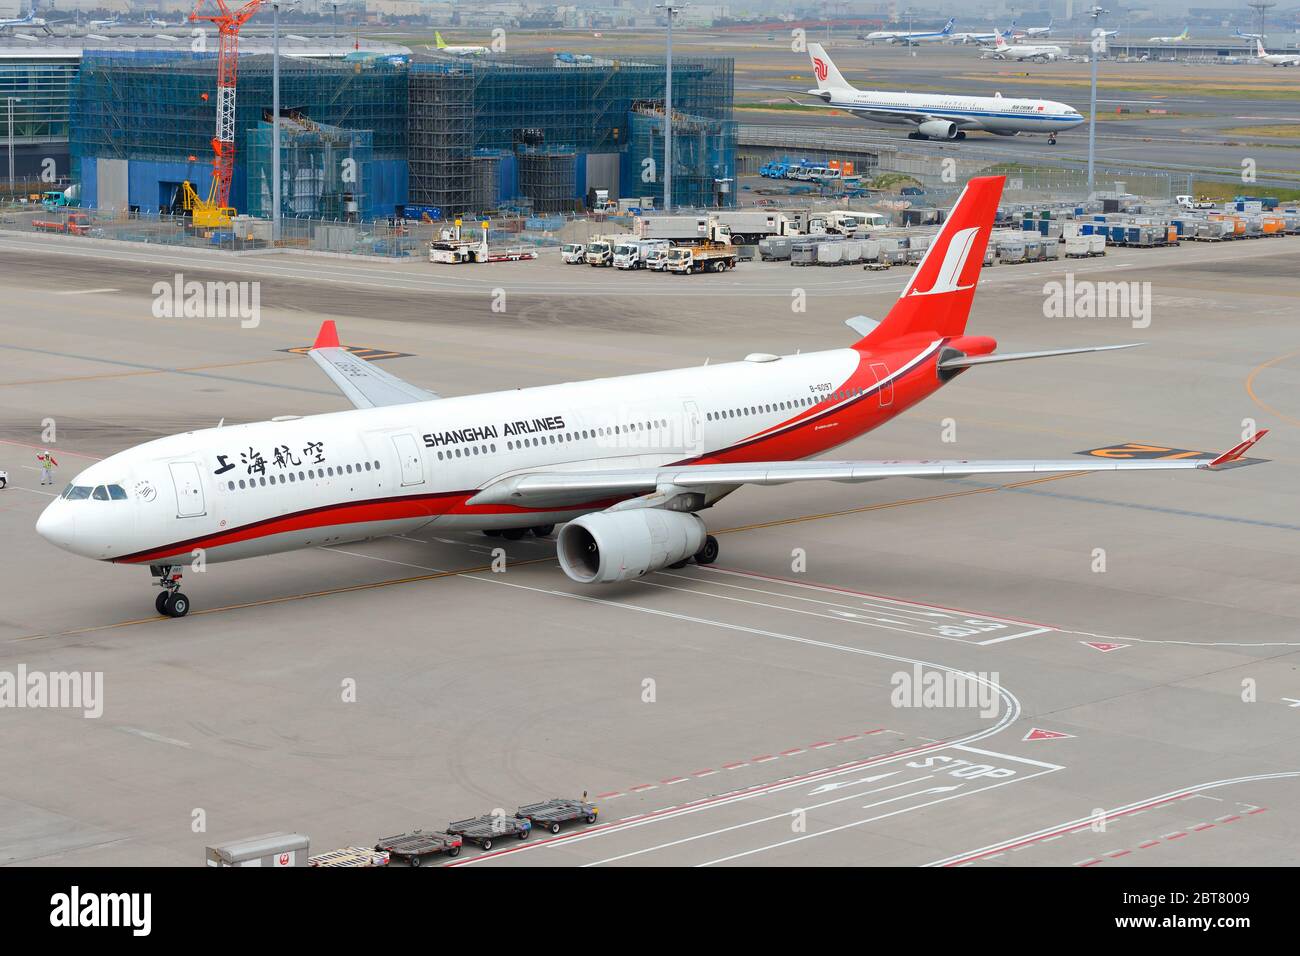 Shanghai Airlines Airbus A330 inbound from Shanghai Pudong Airport. A330-300. Chinese airline airplane at Haneda International Airport. A333. Stock Photo